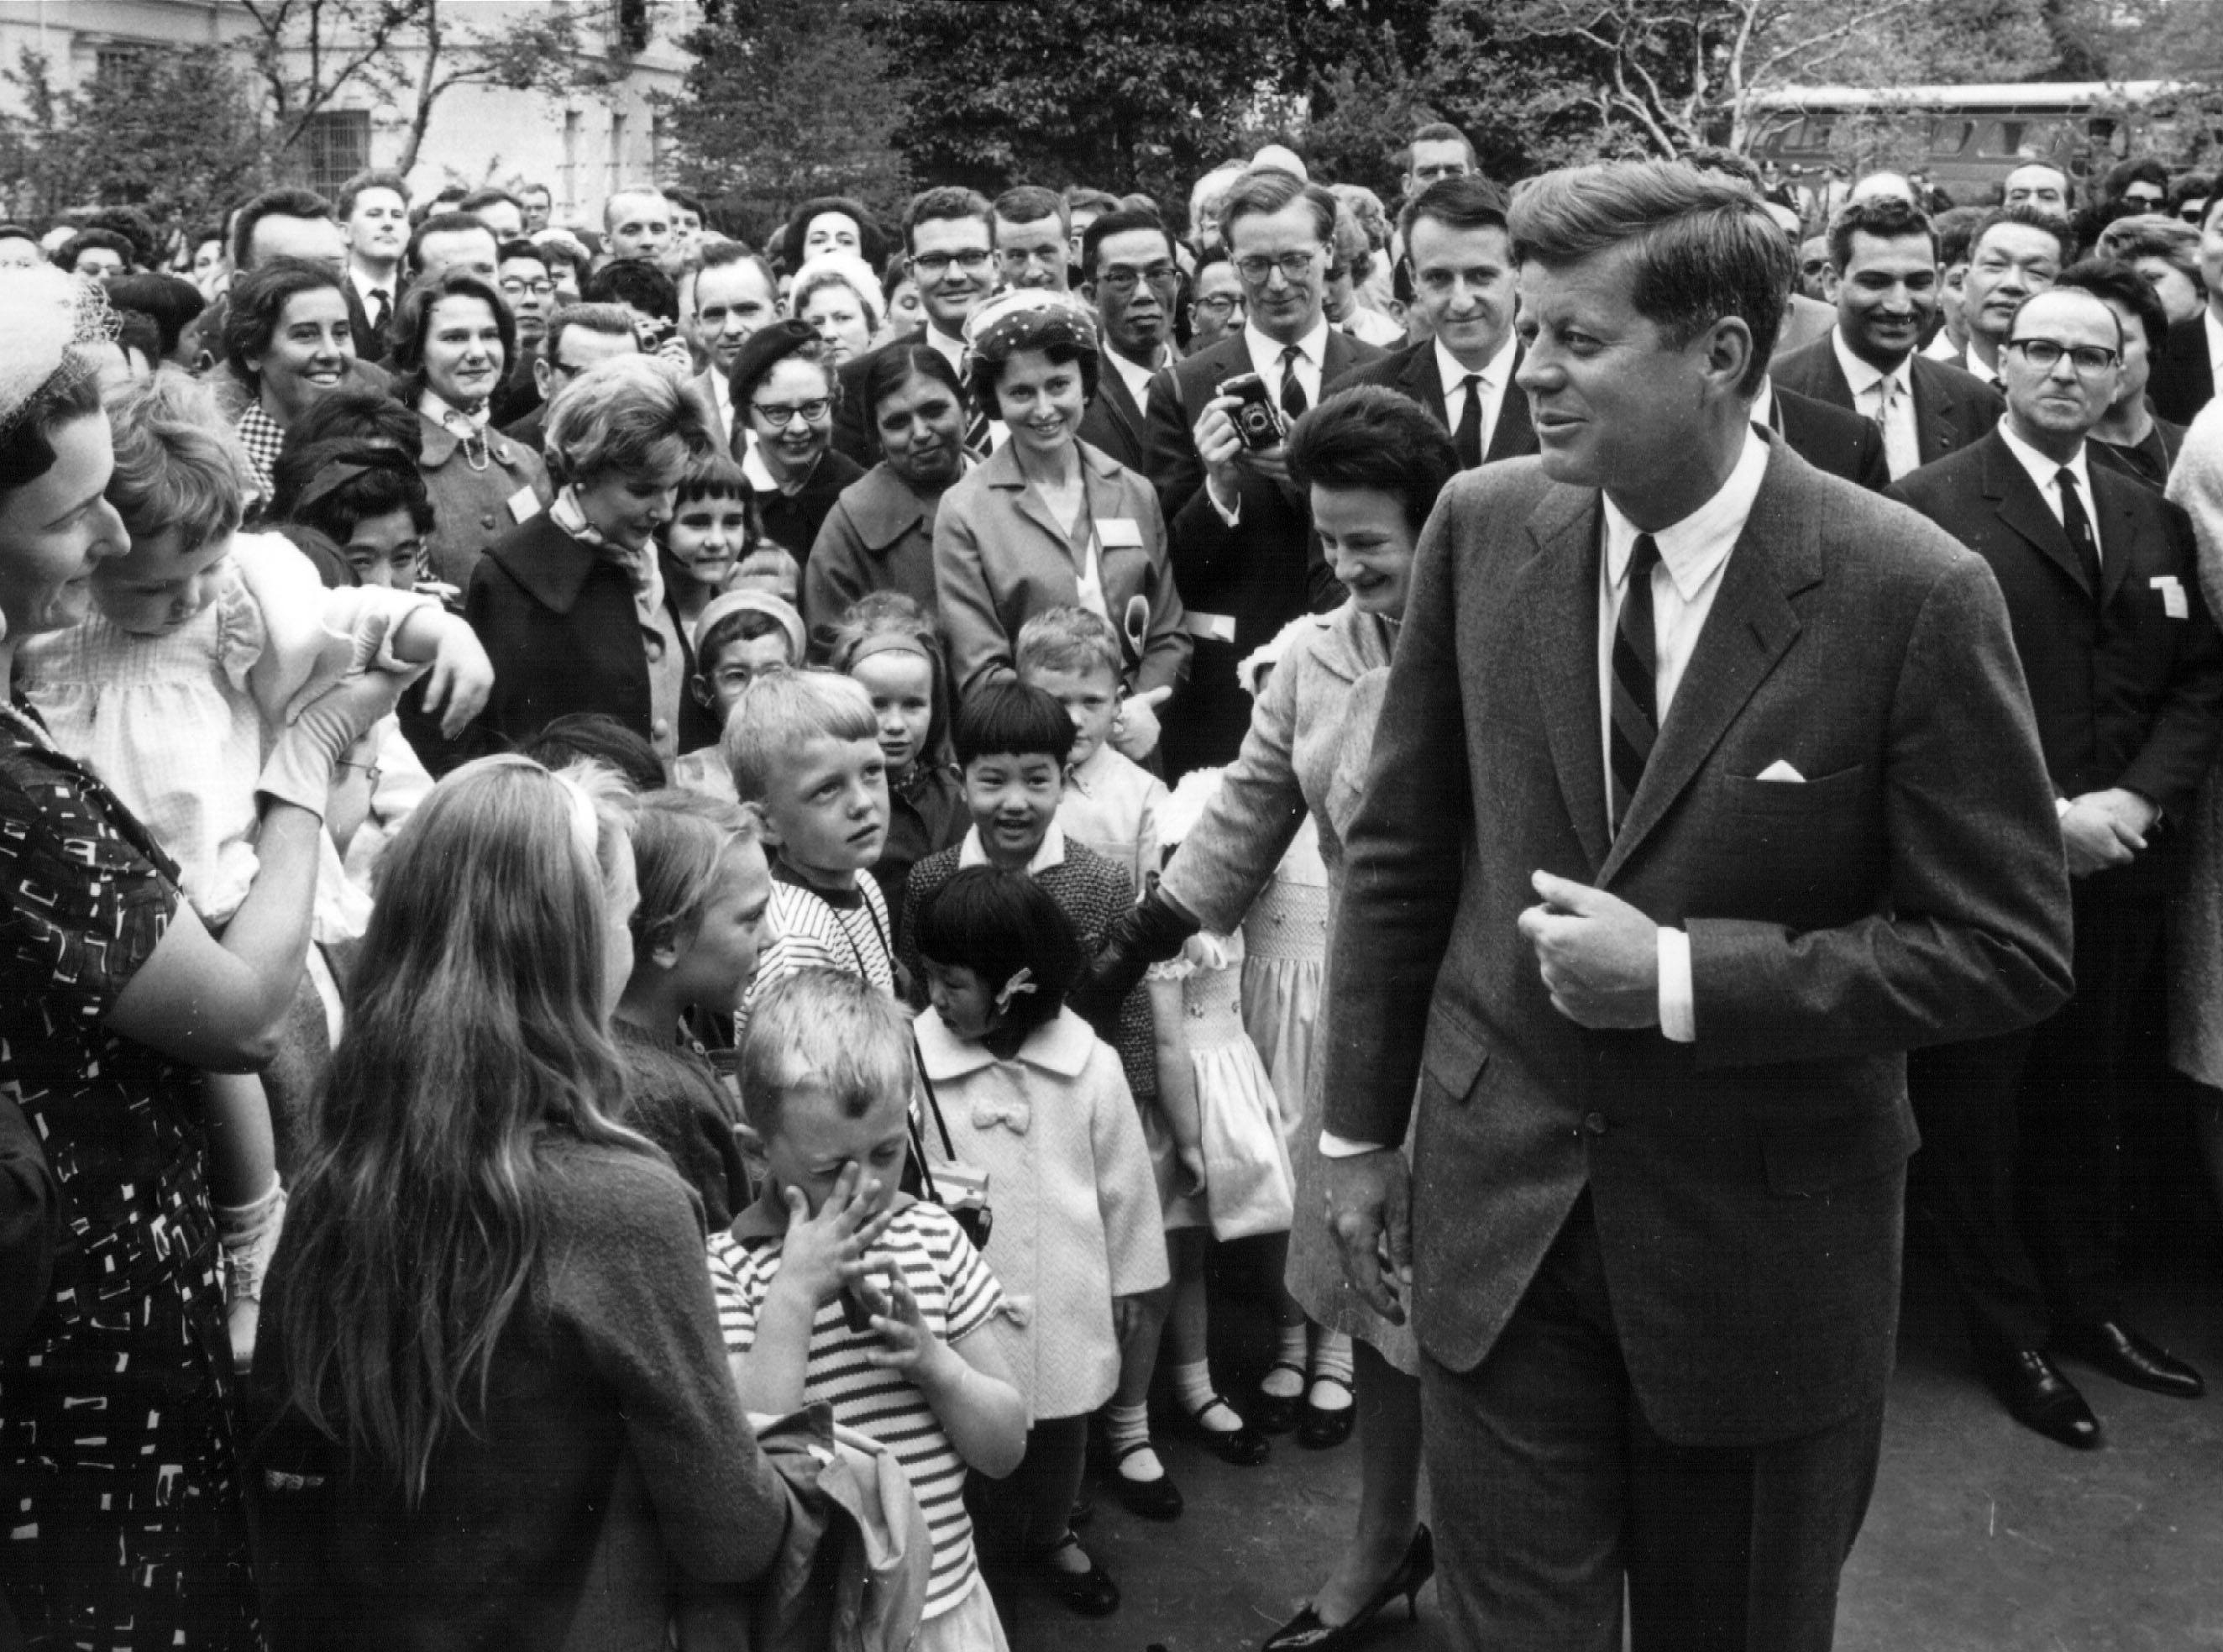 John F. Kennedy greets wellwishers during a ceremony